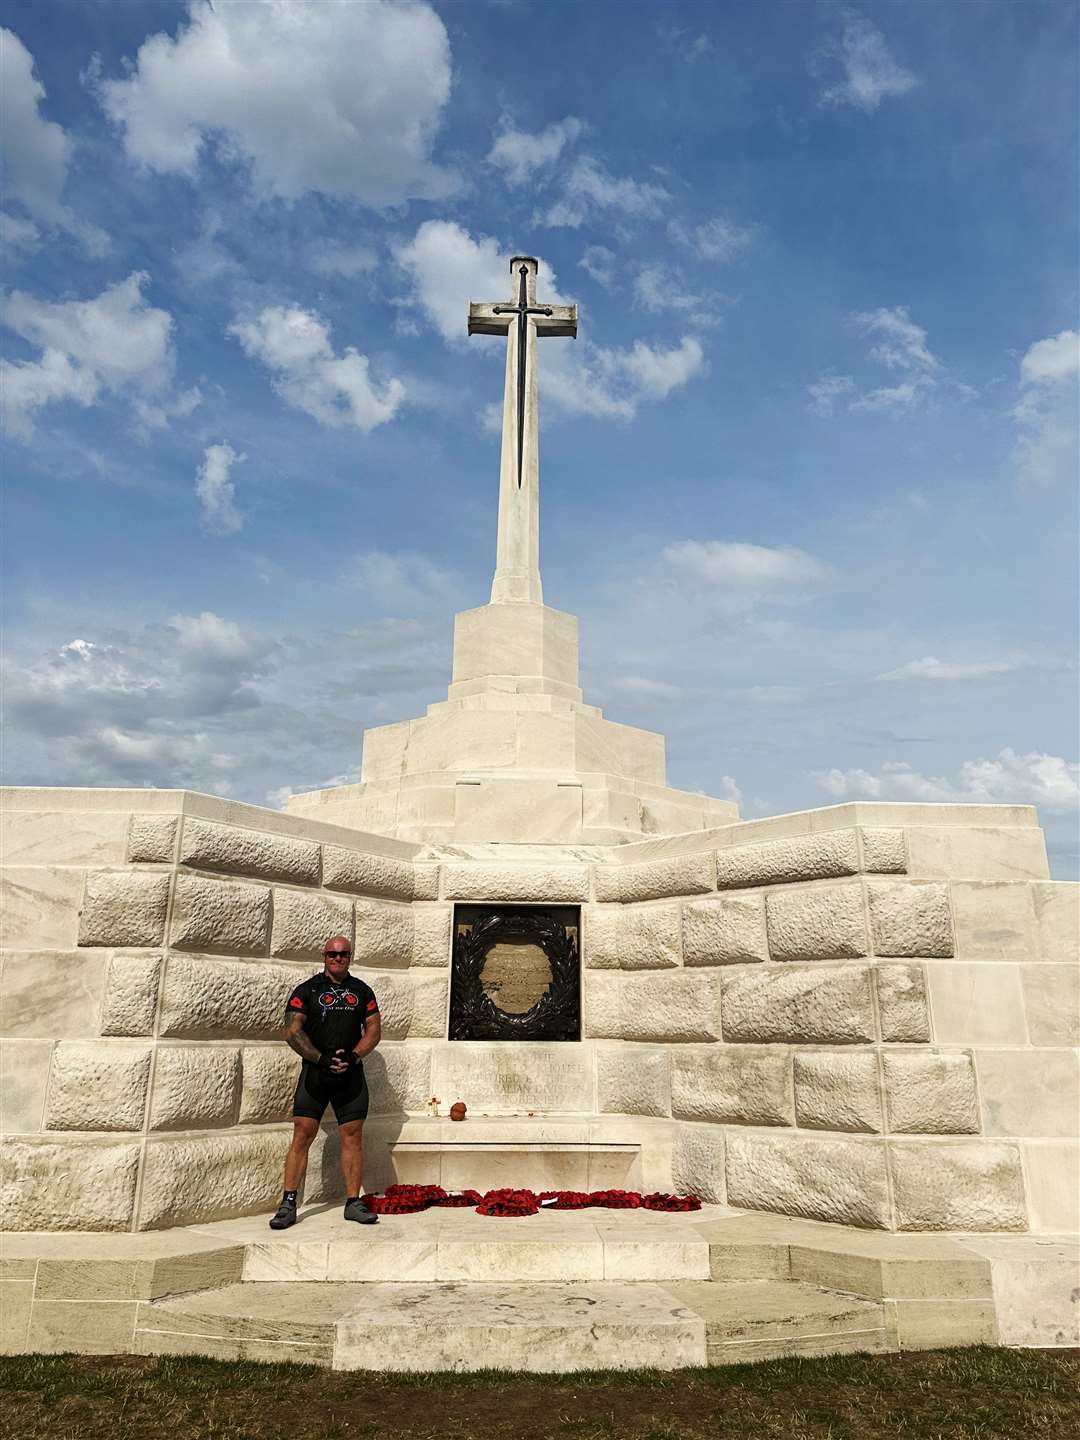 Kev at Tyne Cot cemetery. The Cross of Sacrifice cross is in memory of those whose bodies were not found.